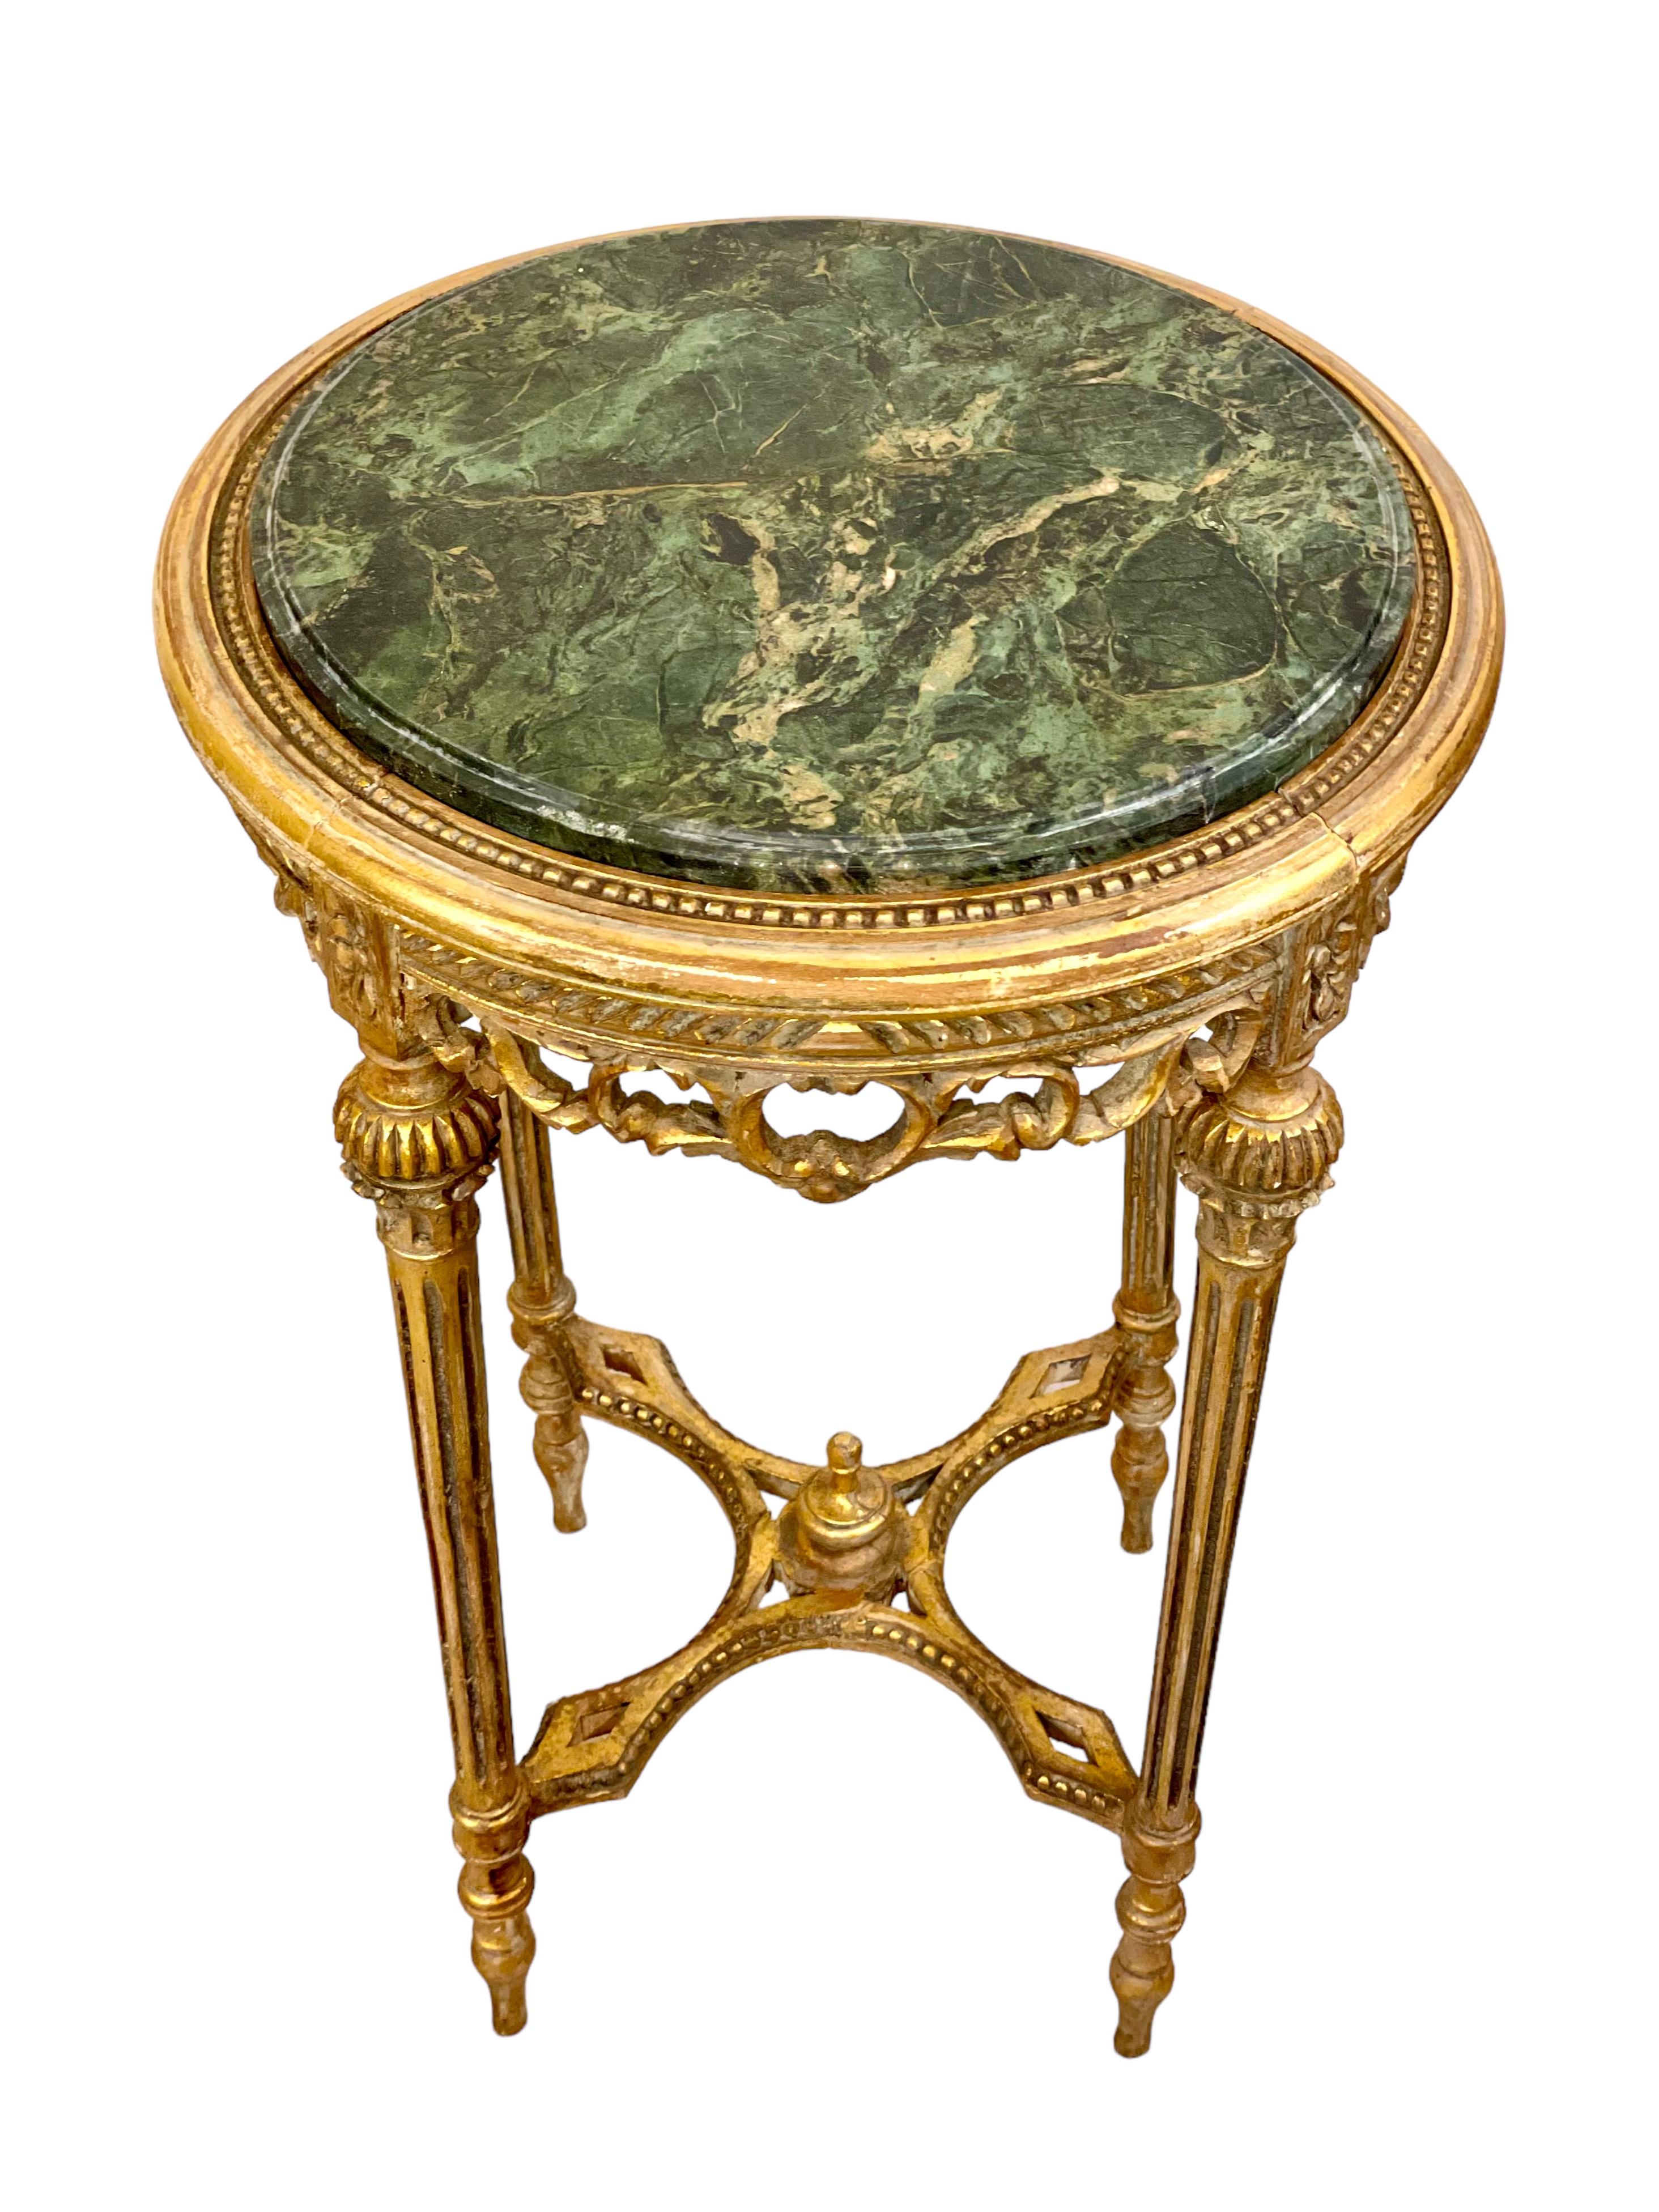 French 19th Century Giltwood and Green Marble Gueridon Table For Sale